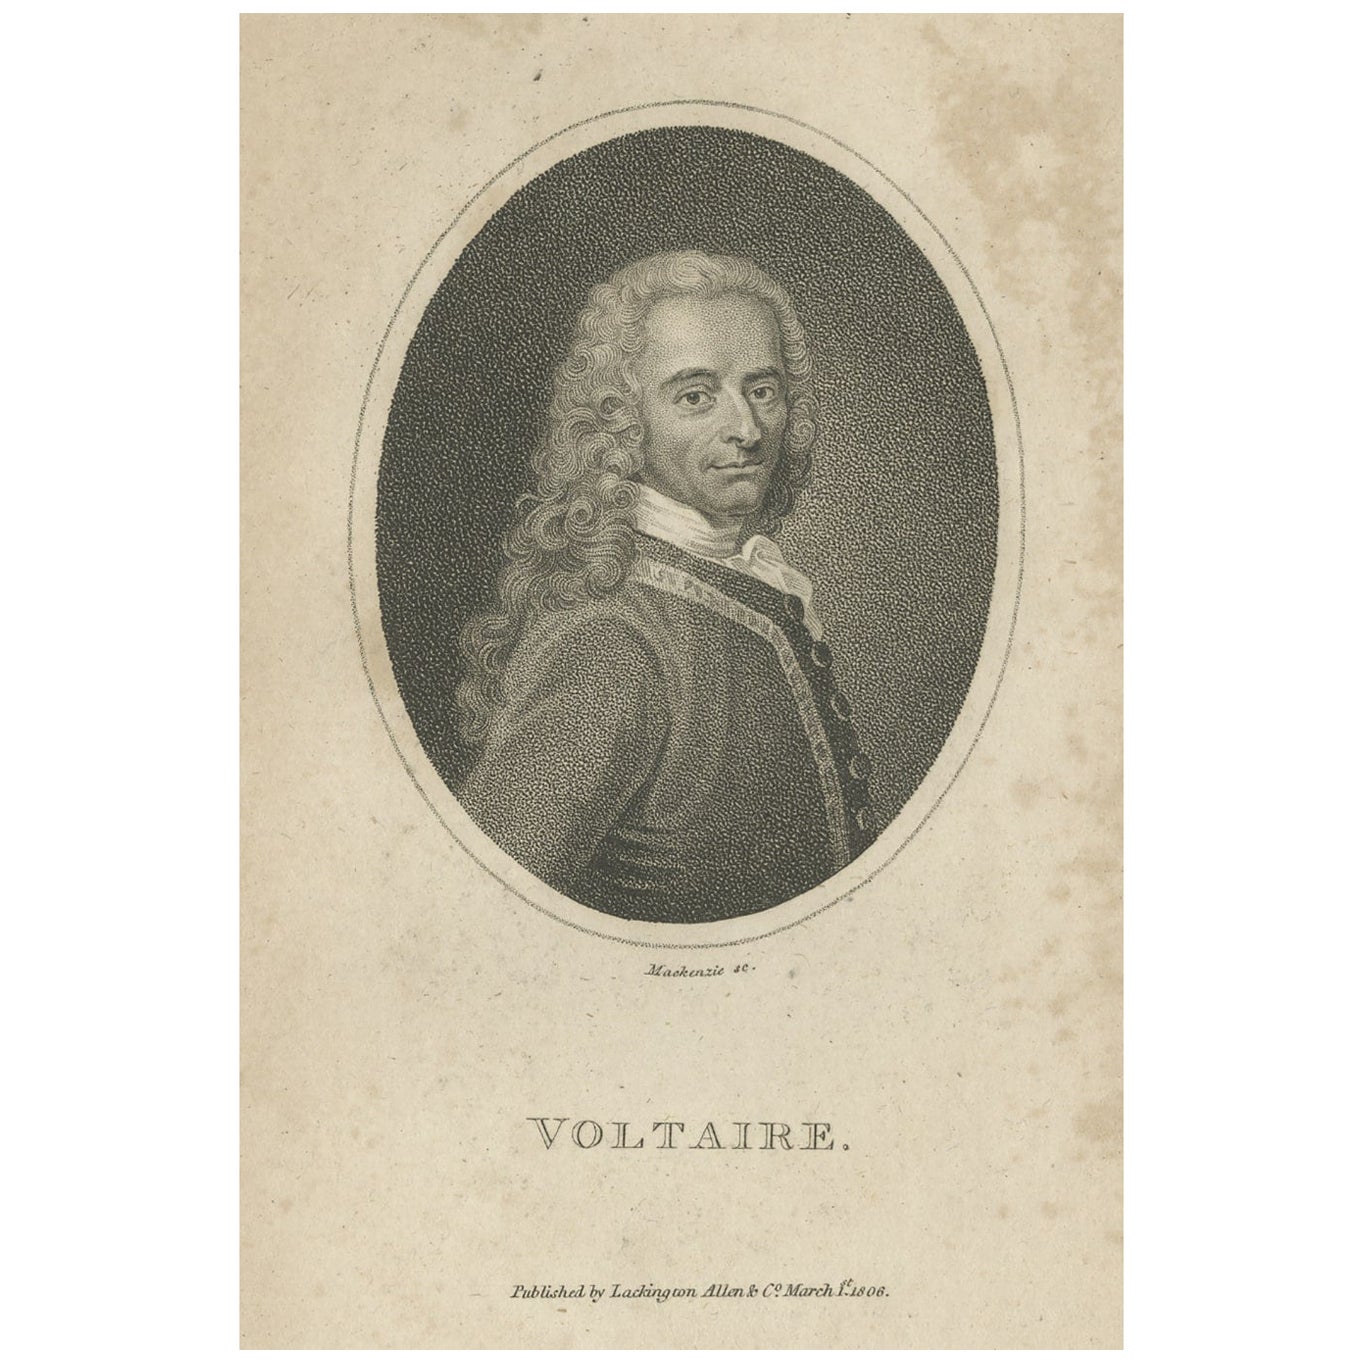 Antique Portrait of French Enlightenment Writer and Philosopher Voltaire, 1806